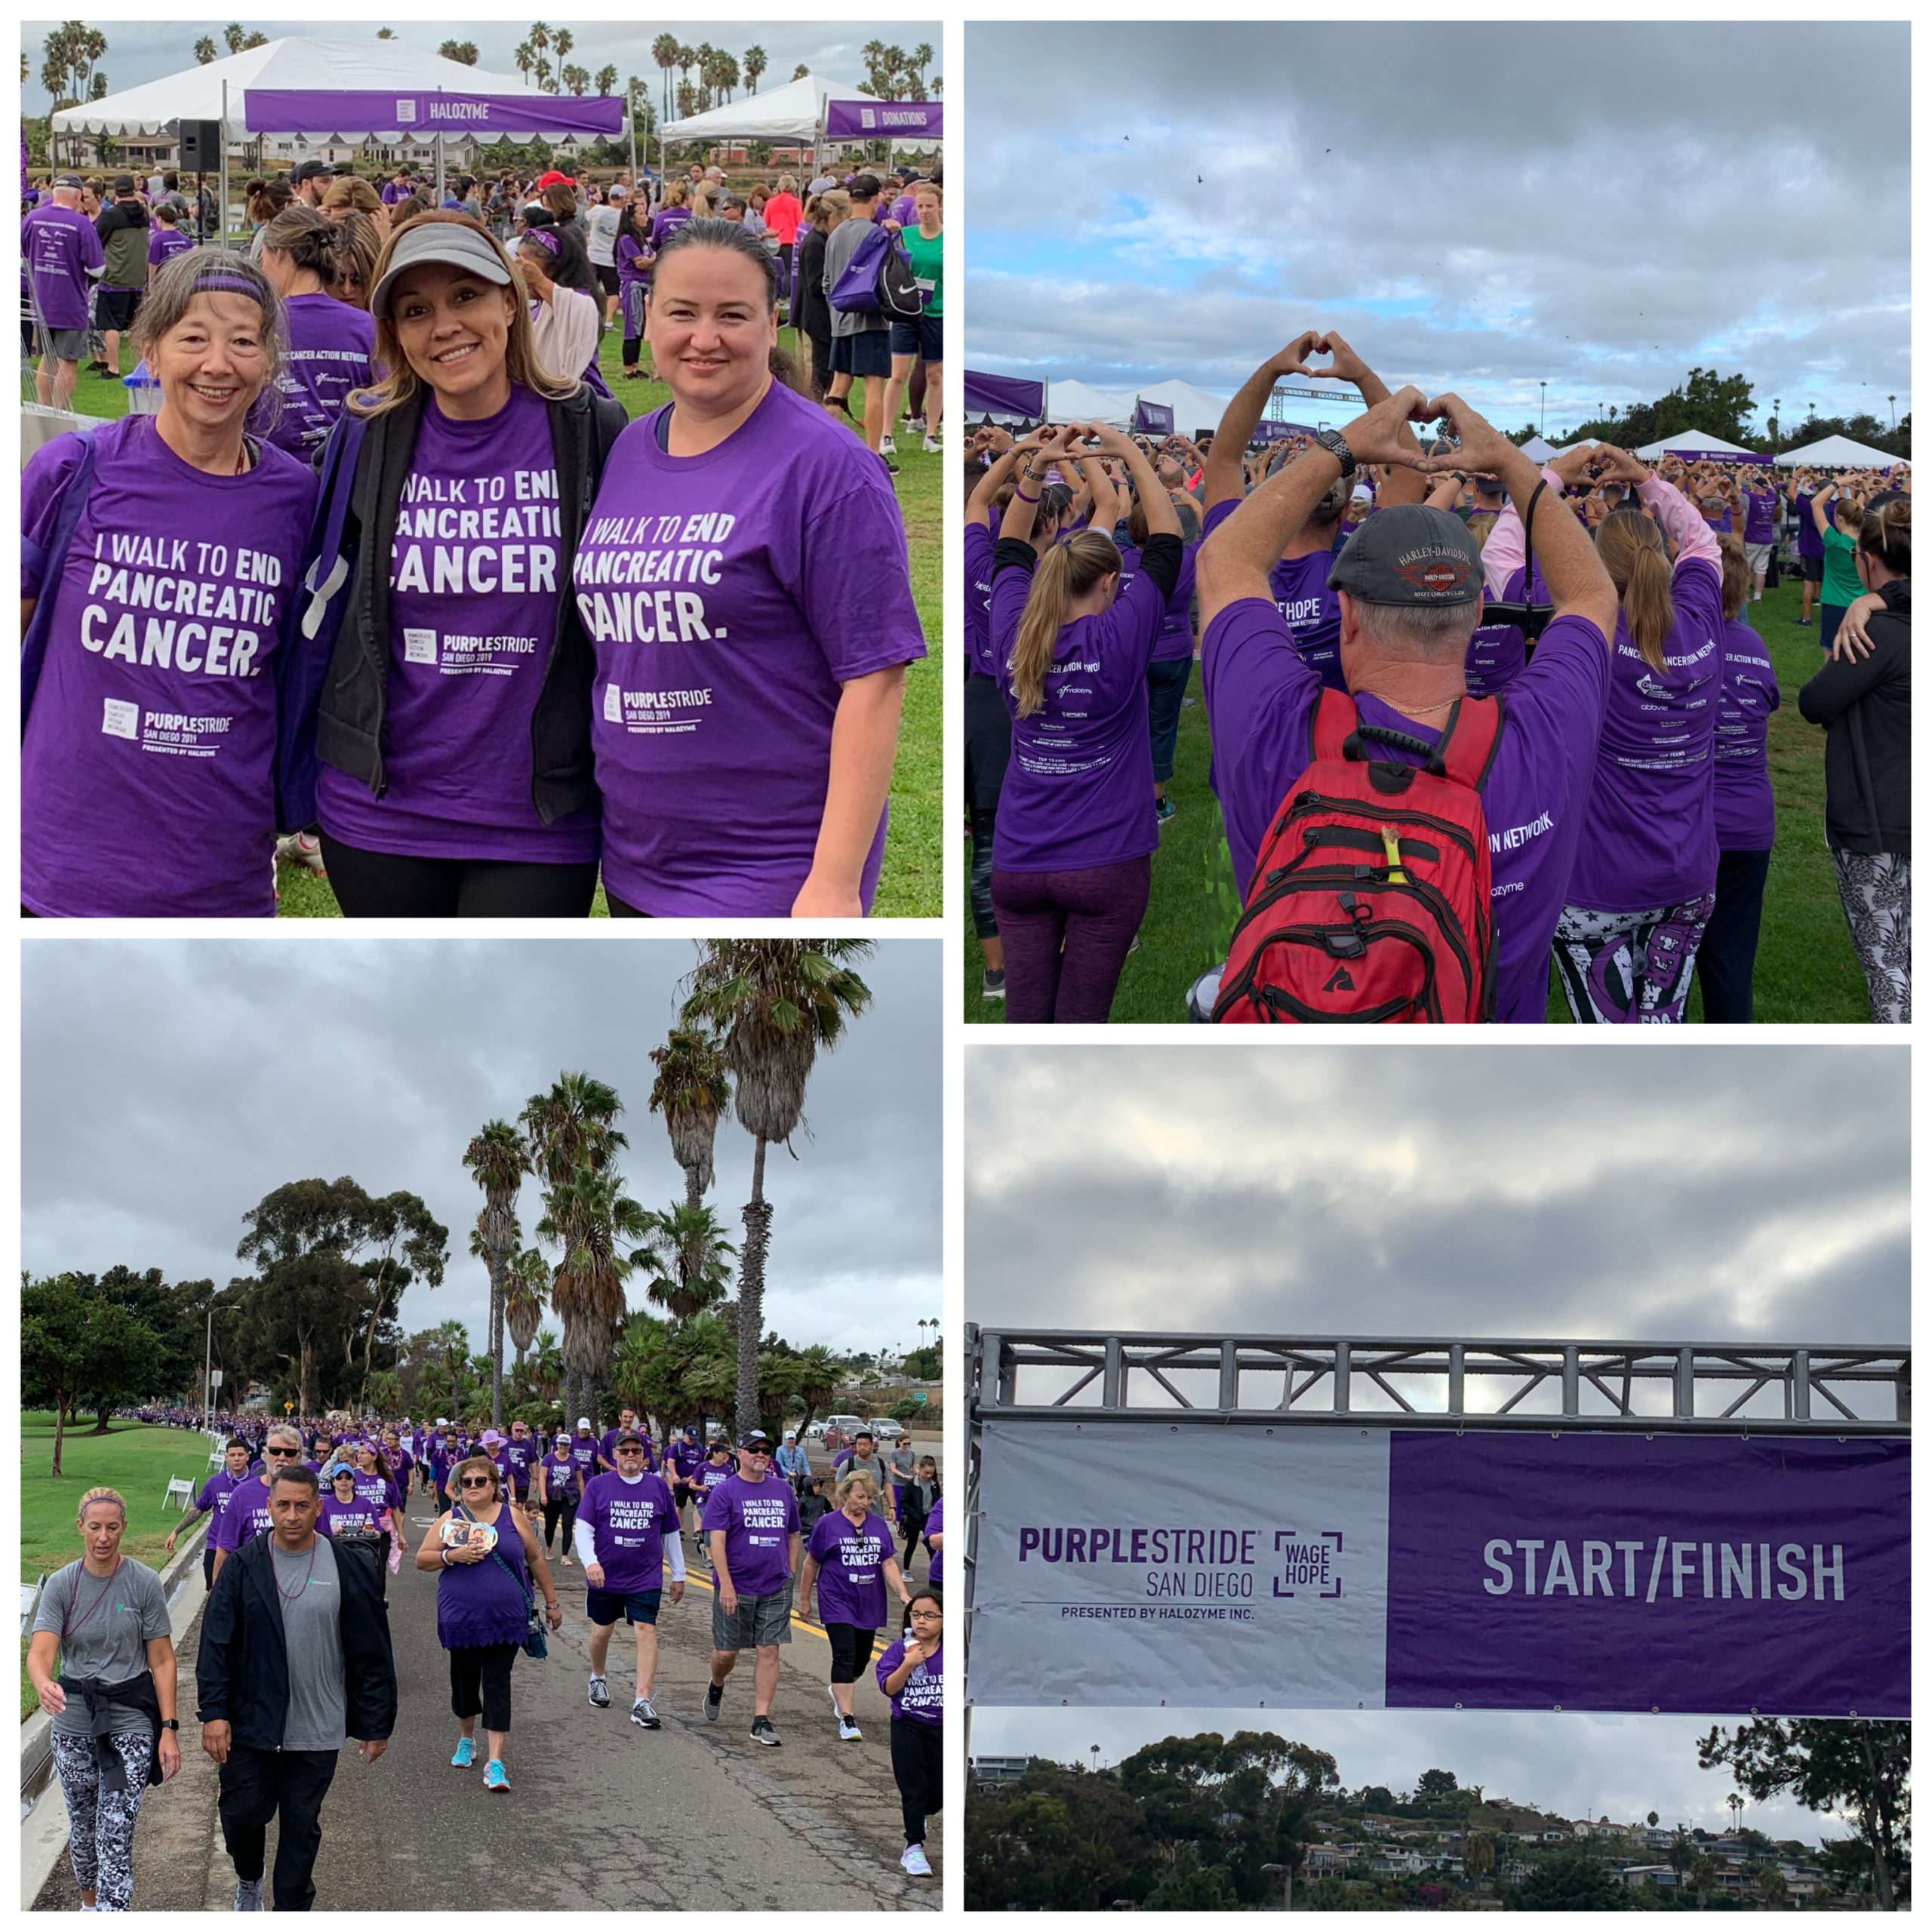 Photos of PurpleStride 5k for Pancreatic Cancer collage